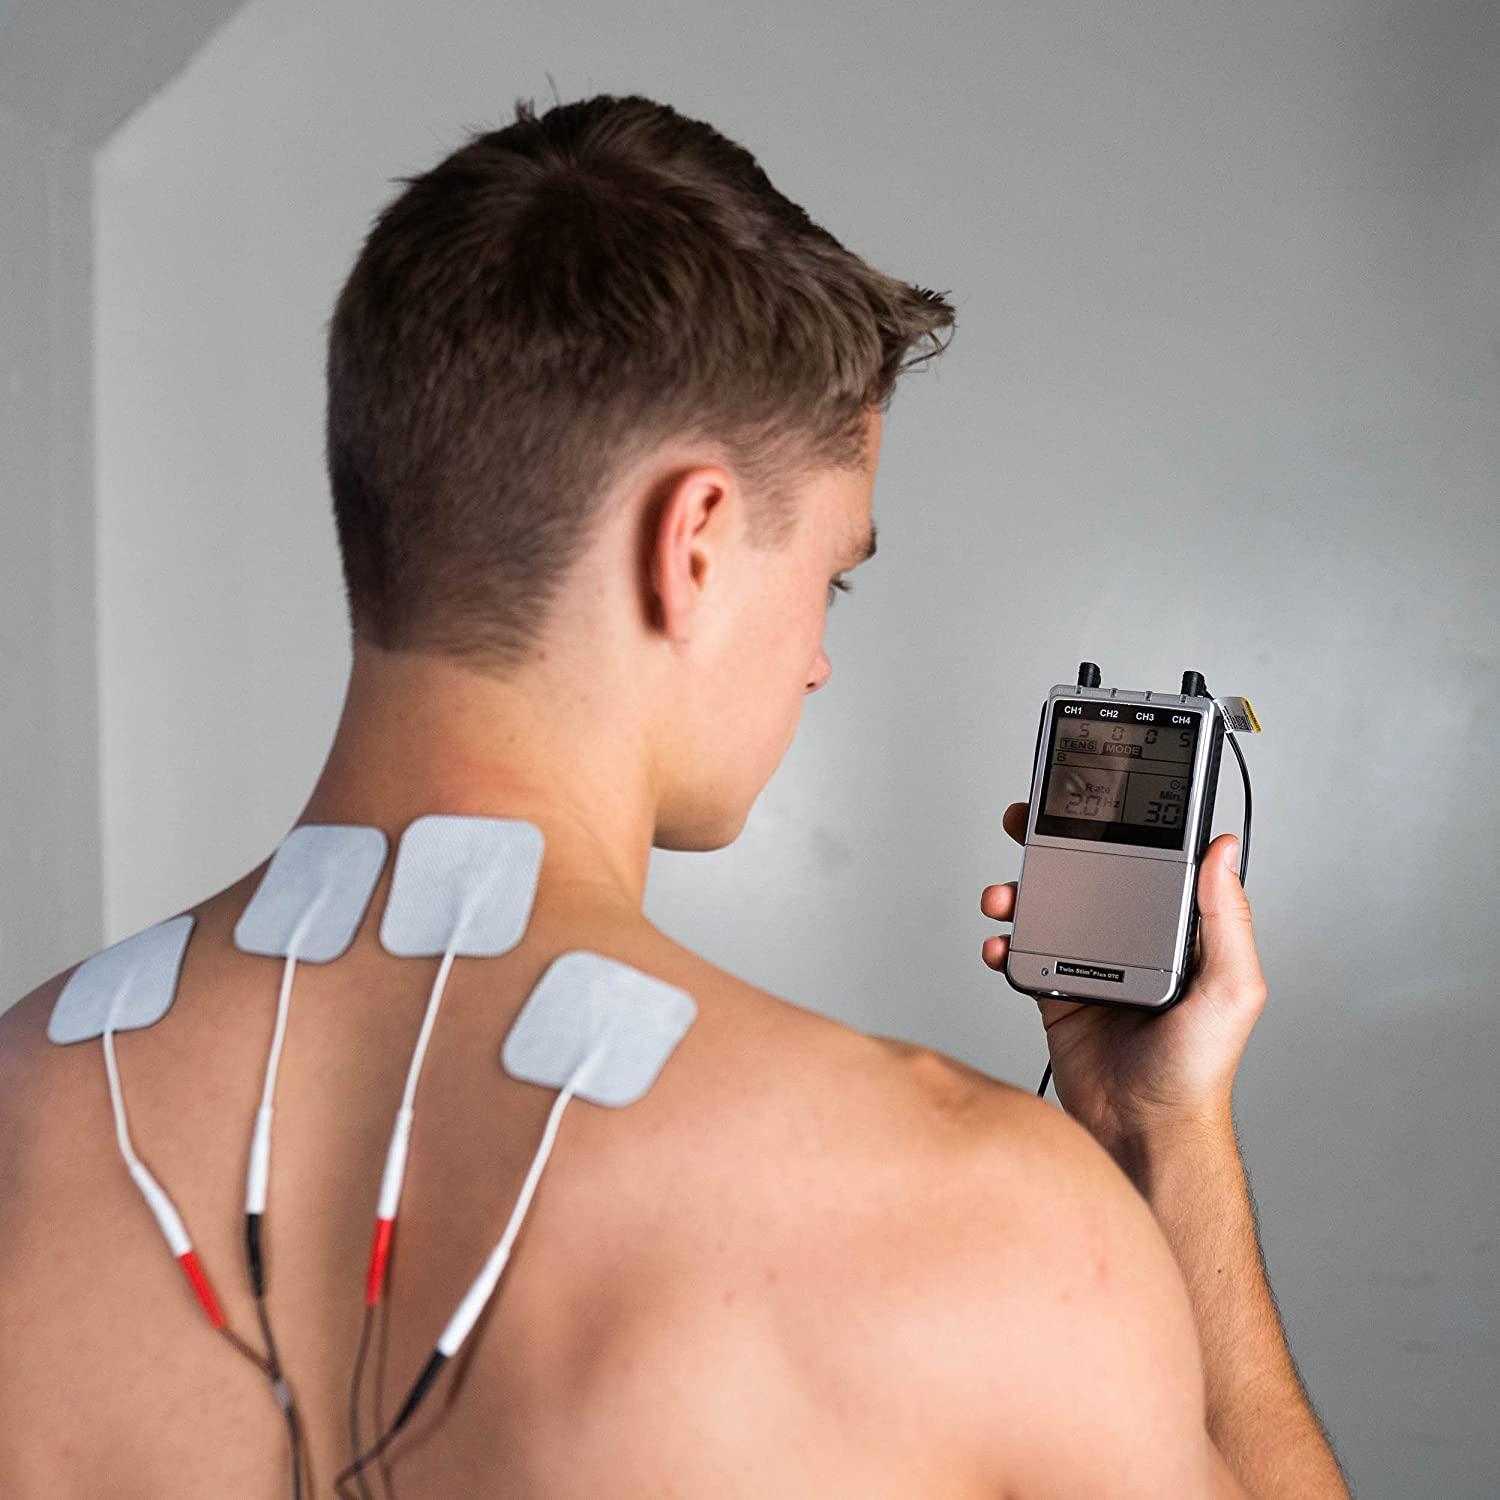  Roscoe Medical TENS Unit and EMS Muscle Stimulator - OTC TENS  Machine for Back Pain Relief, Lower Back Pain Relief, Neck Pain, or  Sciatica Pain Relief, Clinical Strength by TENS 7000